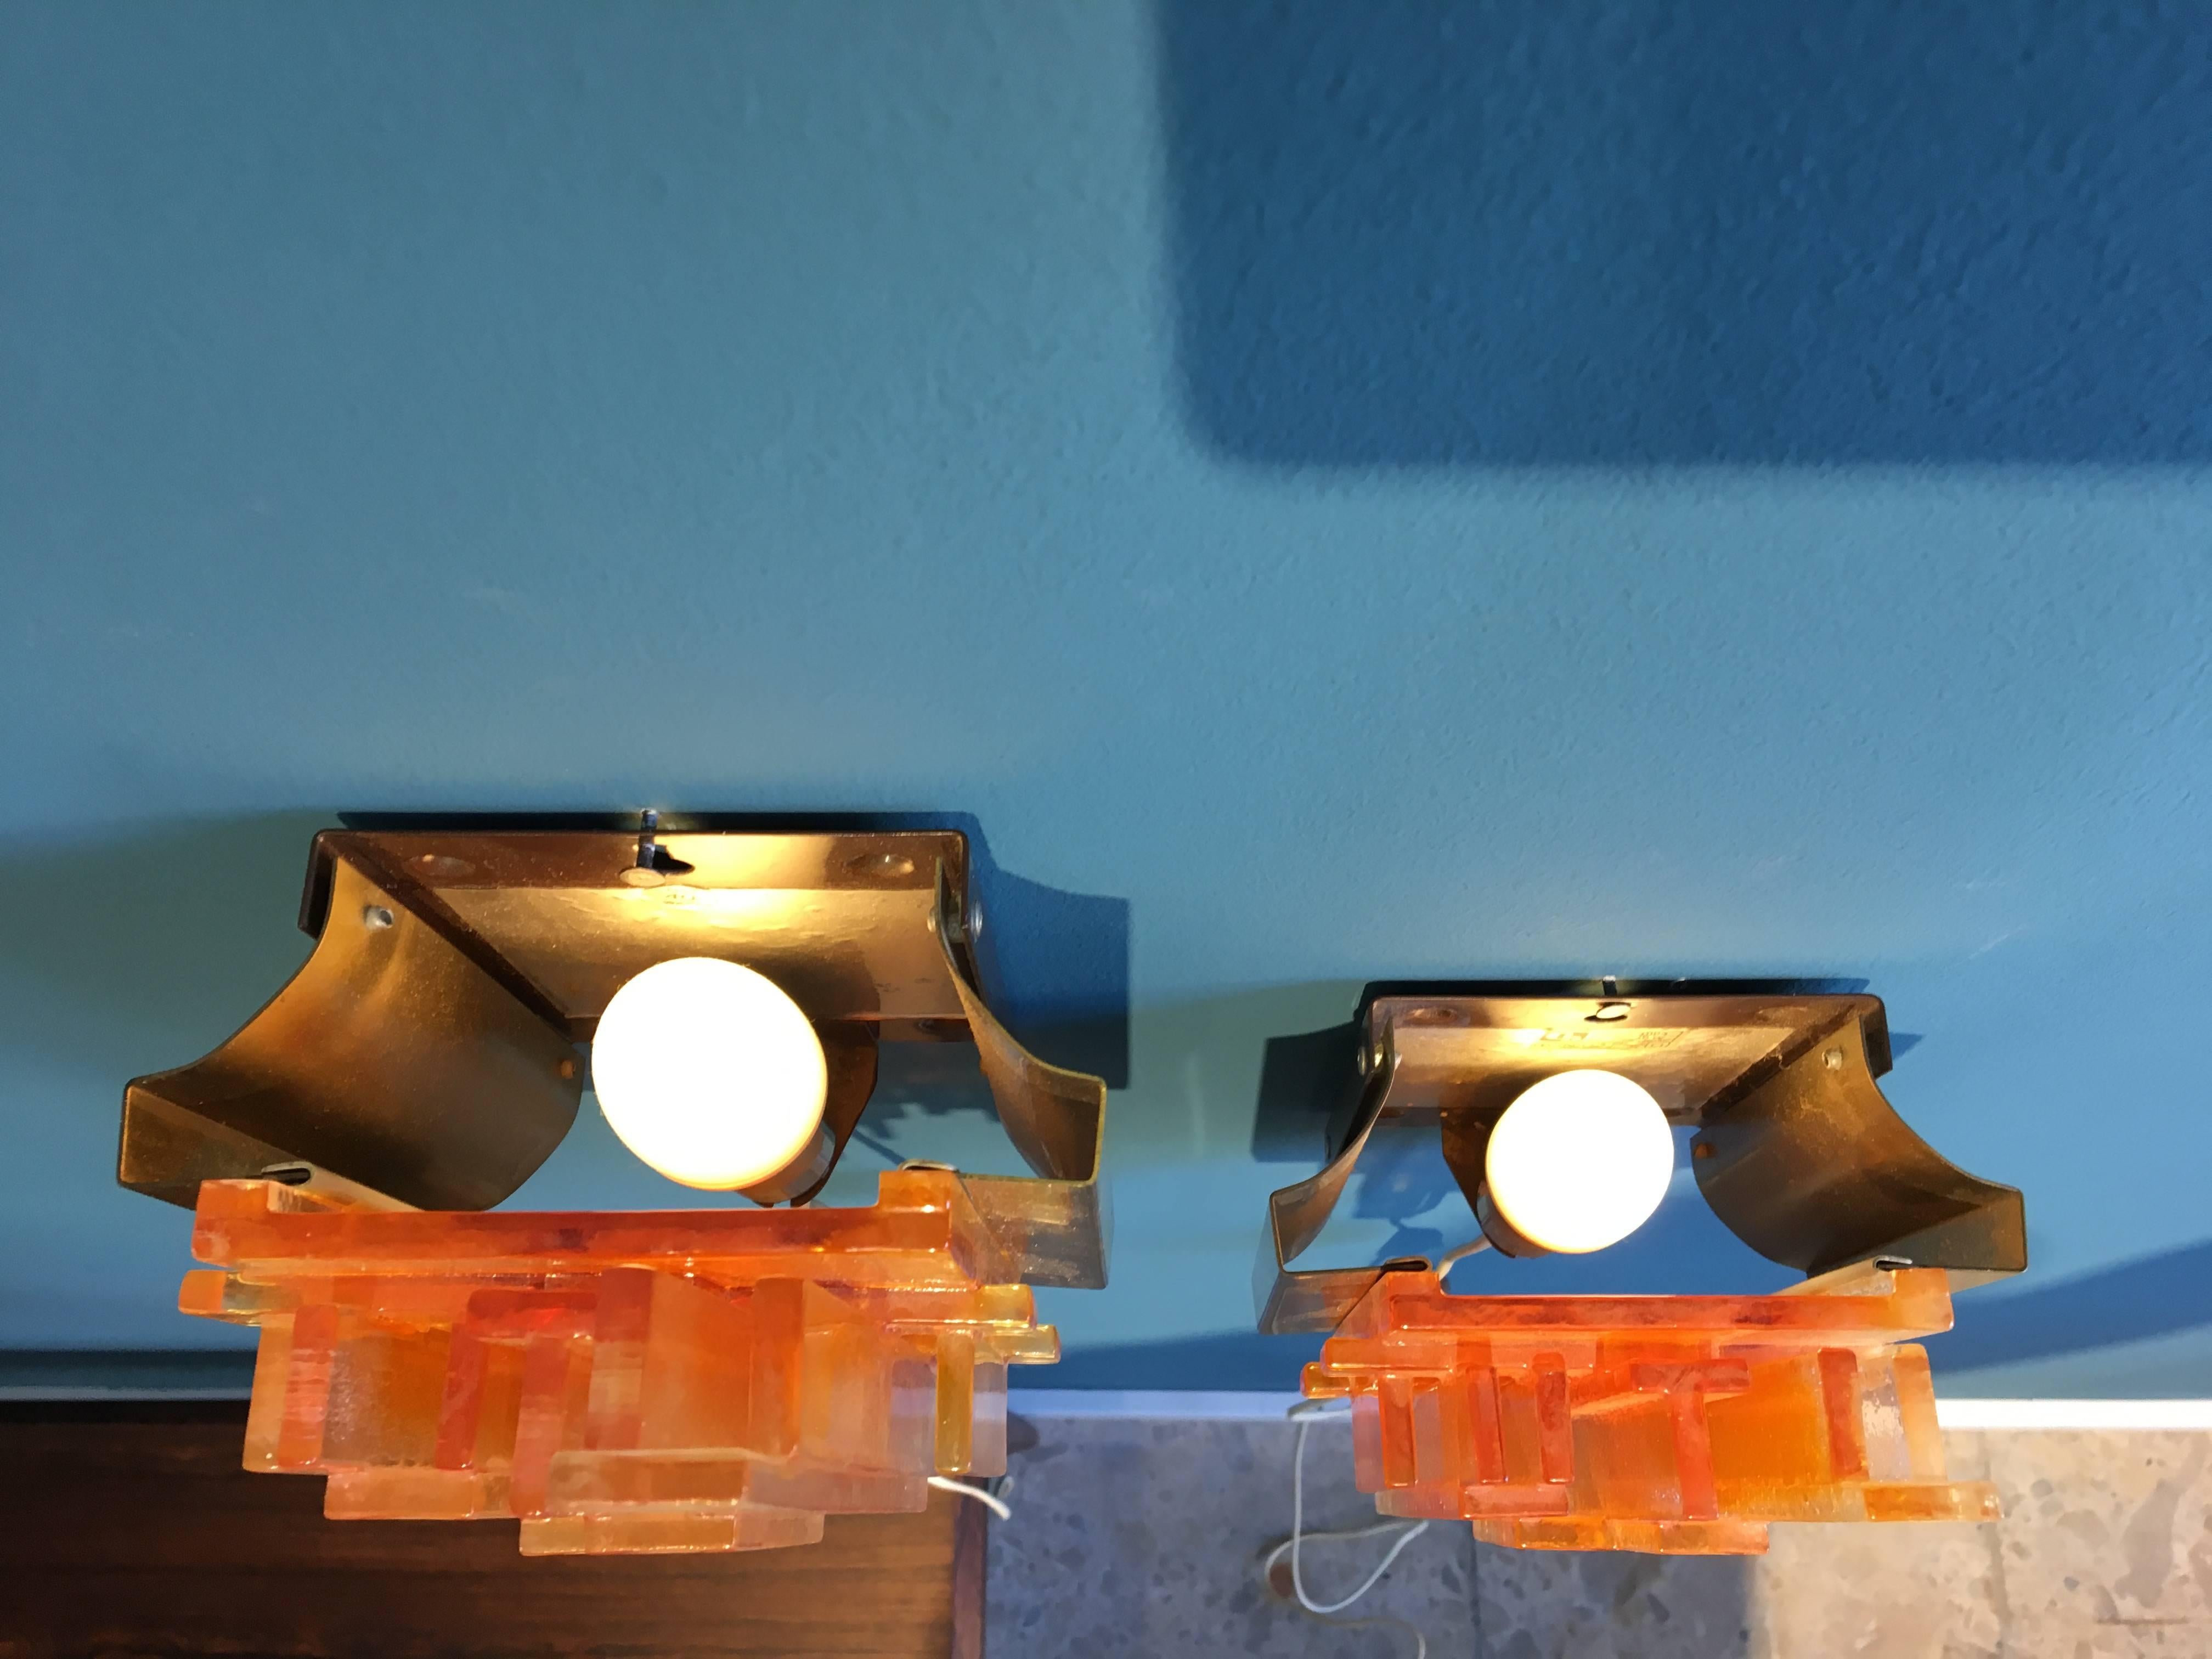 This set of two wall lamps called Model 1004 was designed by Claus Bolby and produced by Danish company Cebo Industri in the 1970s. The lamps have a switch and still have their original stickers. The acrylic has colors of orange, yellow and white